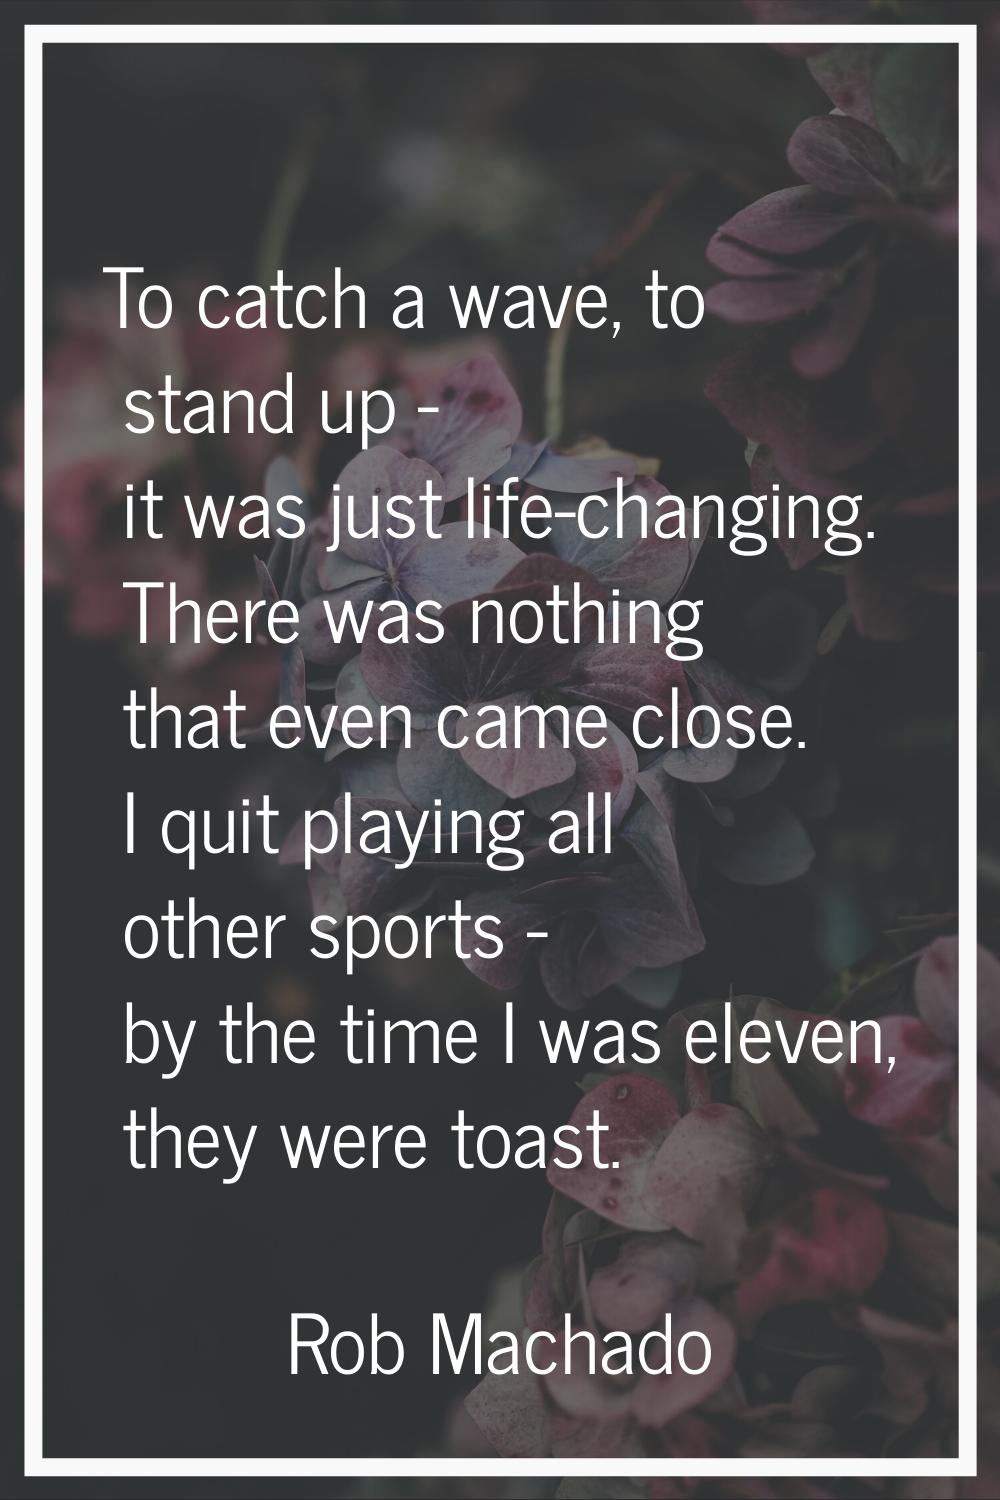 To catch a wave, to stand up - it was just life-changing. There was nothing that even came close. I